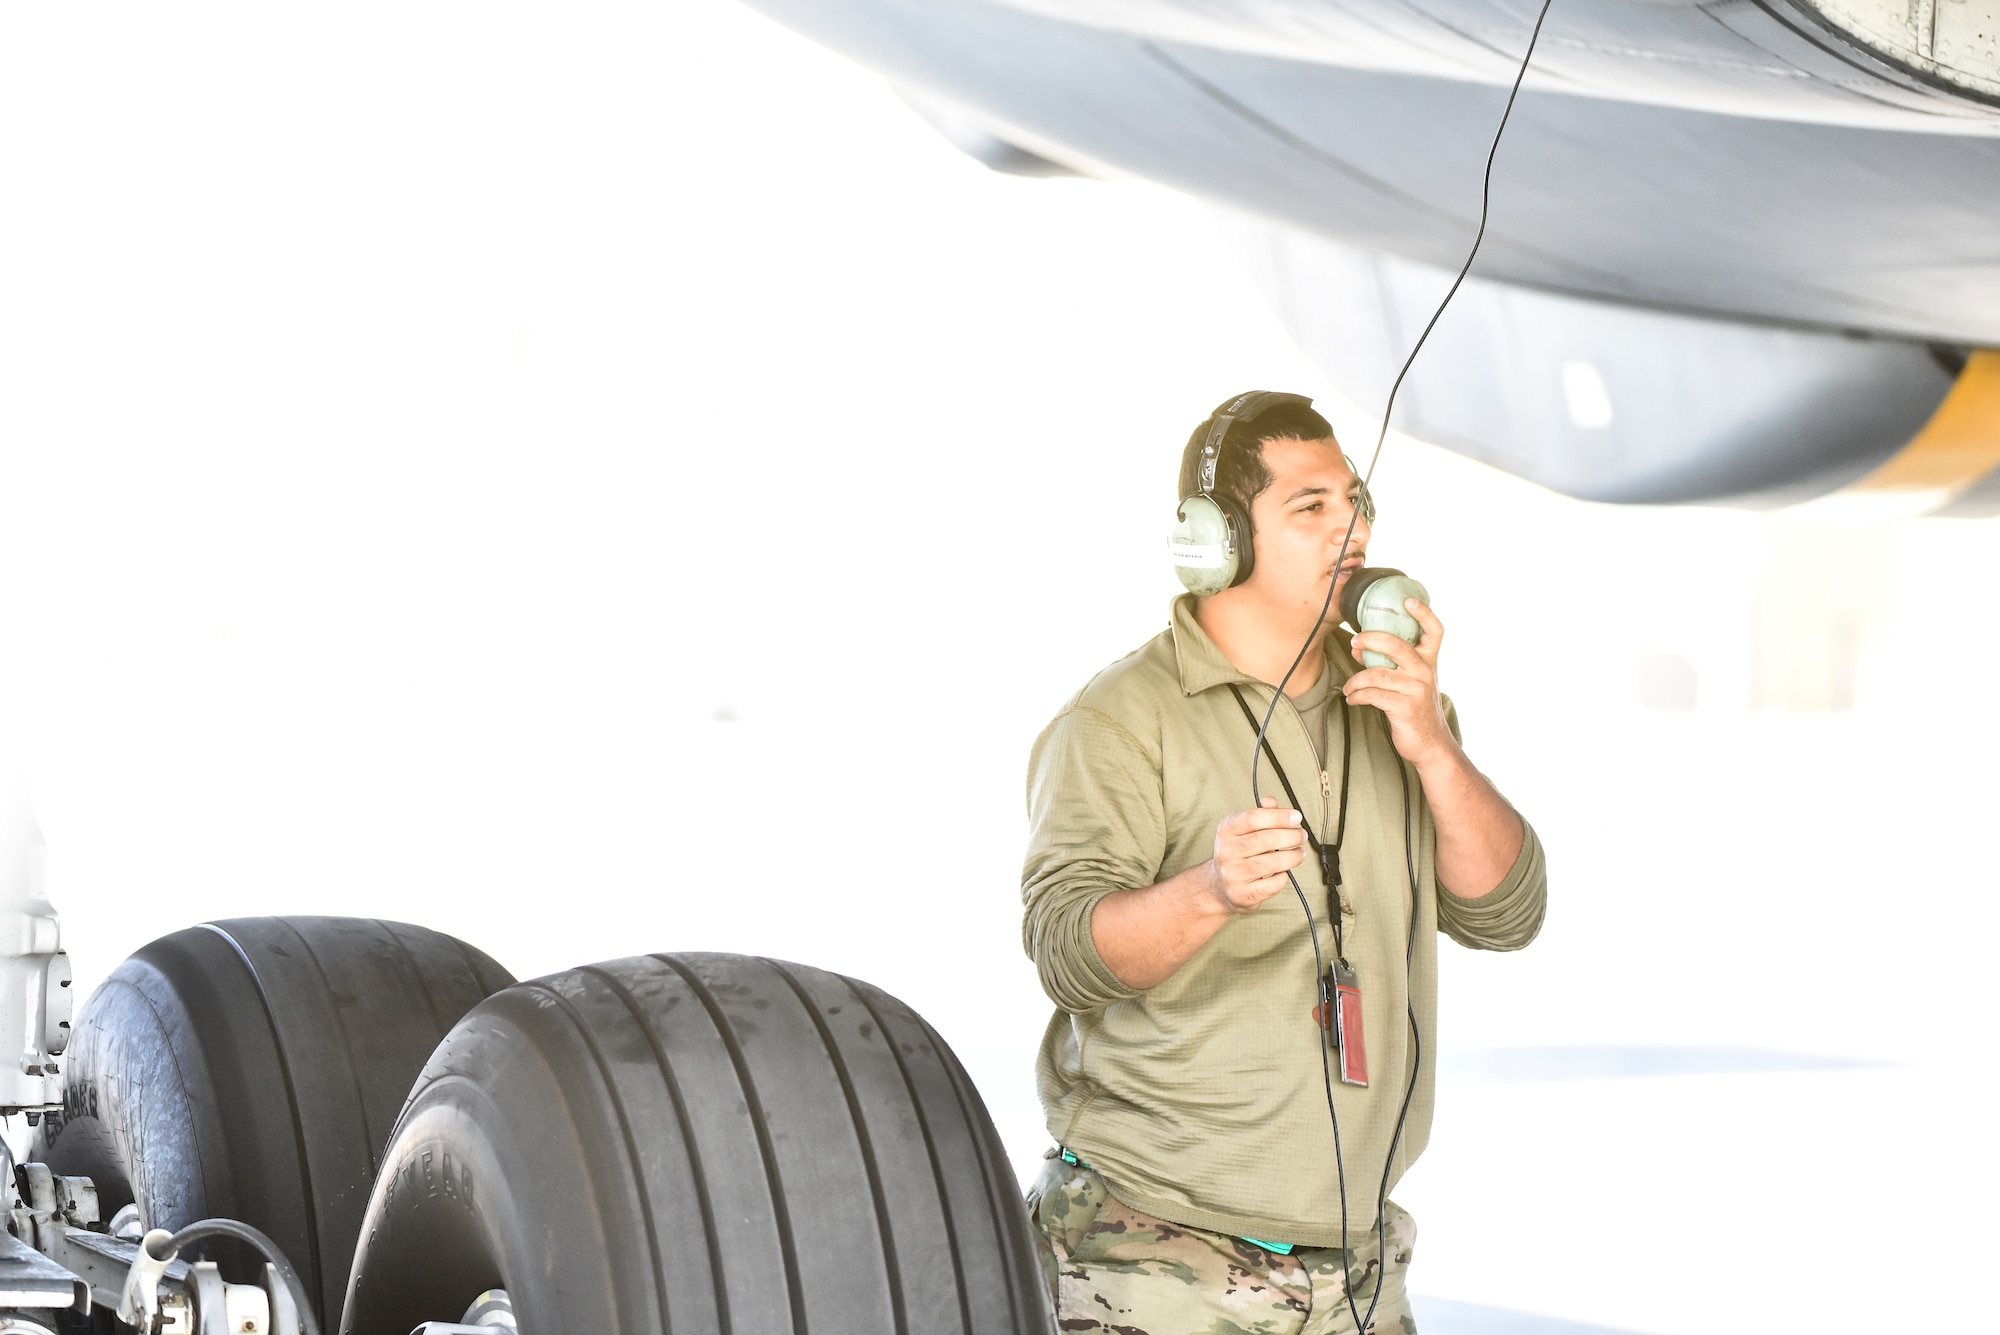 Tech Sgt. Louis Matos, 380th Expeditionary Aircraft Maintenance Squadron hydraulic systems specialist, troubleshoots a KC-10 Extender at Al Dhafra Air Base, United Arab Emirates, Mar. 5, 2019. Hydraulic systems specialists are responsible for maintaining fluid-, air- or gas-pressured devices on aircraft. (U.S. Air Force photo by Senior Airman Mya M. Crosby)